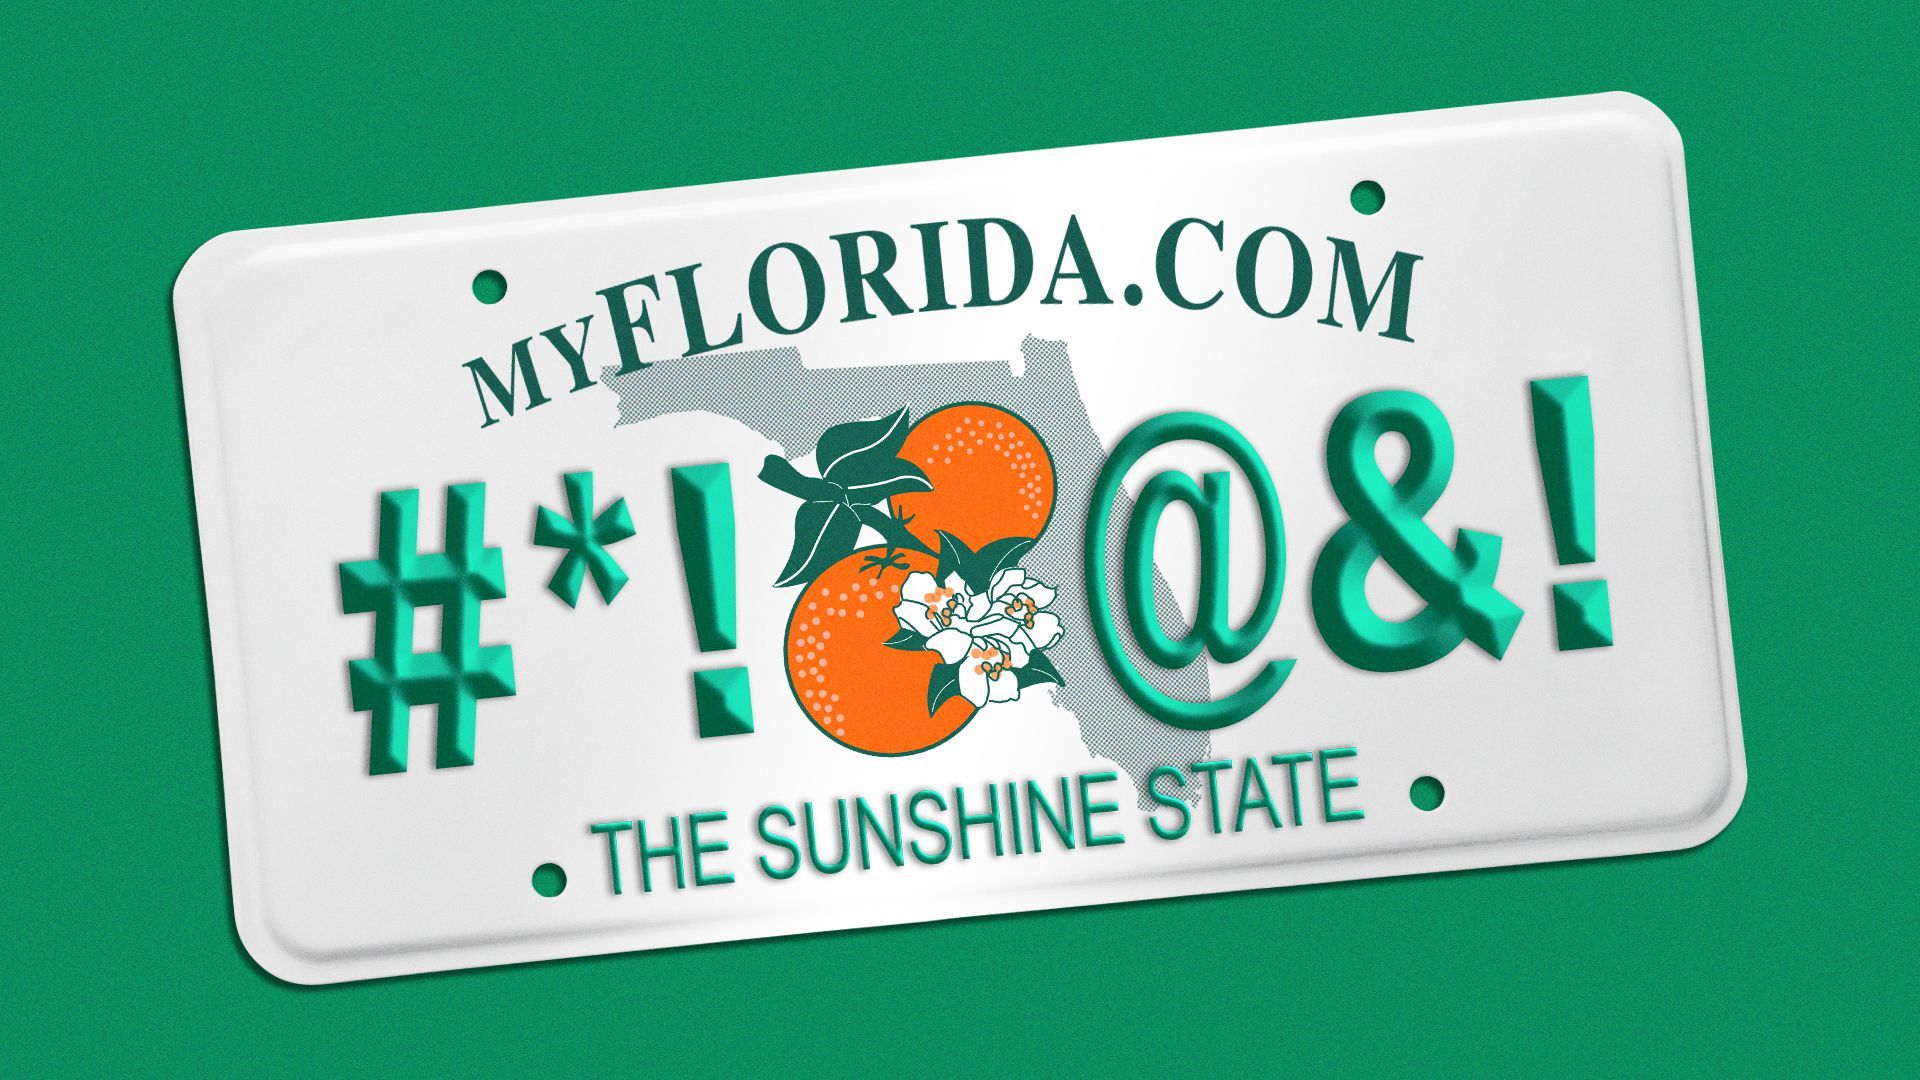 Illustration of a Florida vanity license plate with symbols implying a swear word.